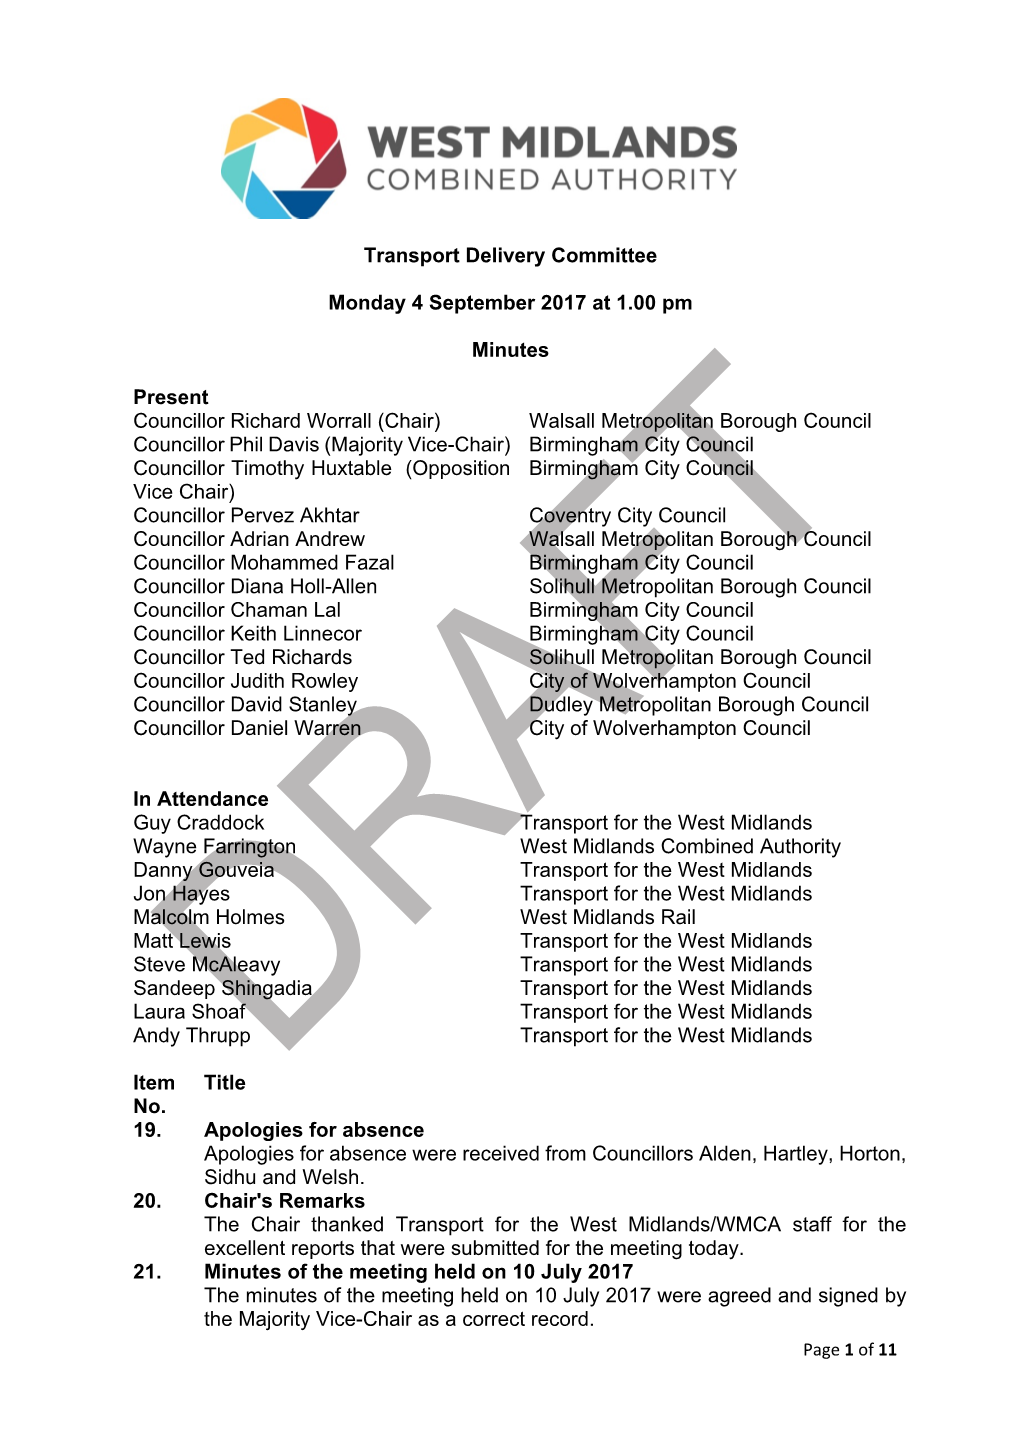 Transport Delivery Committee Monday 4 September 2017 at 1.00 Pm